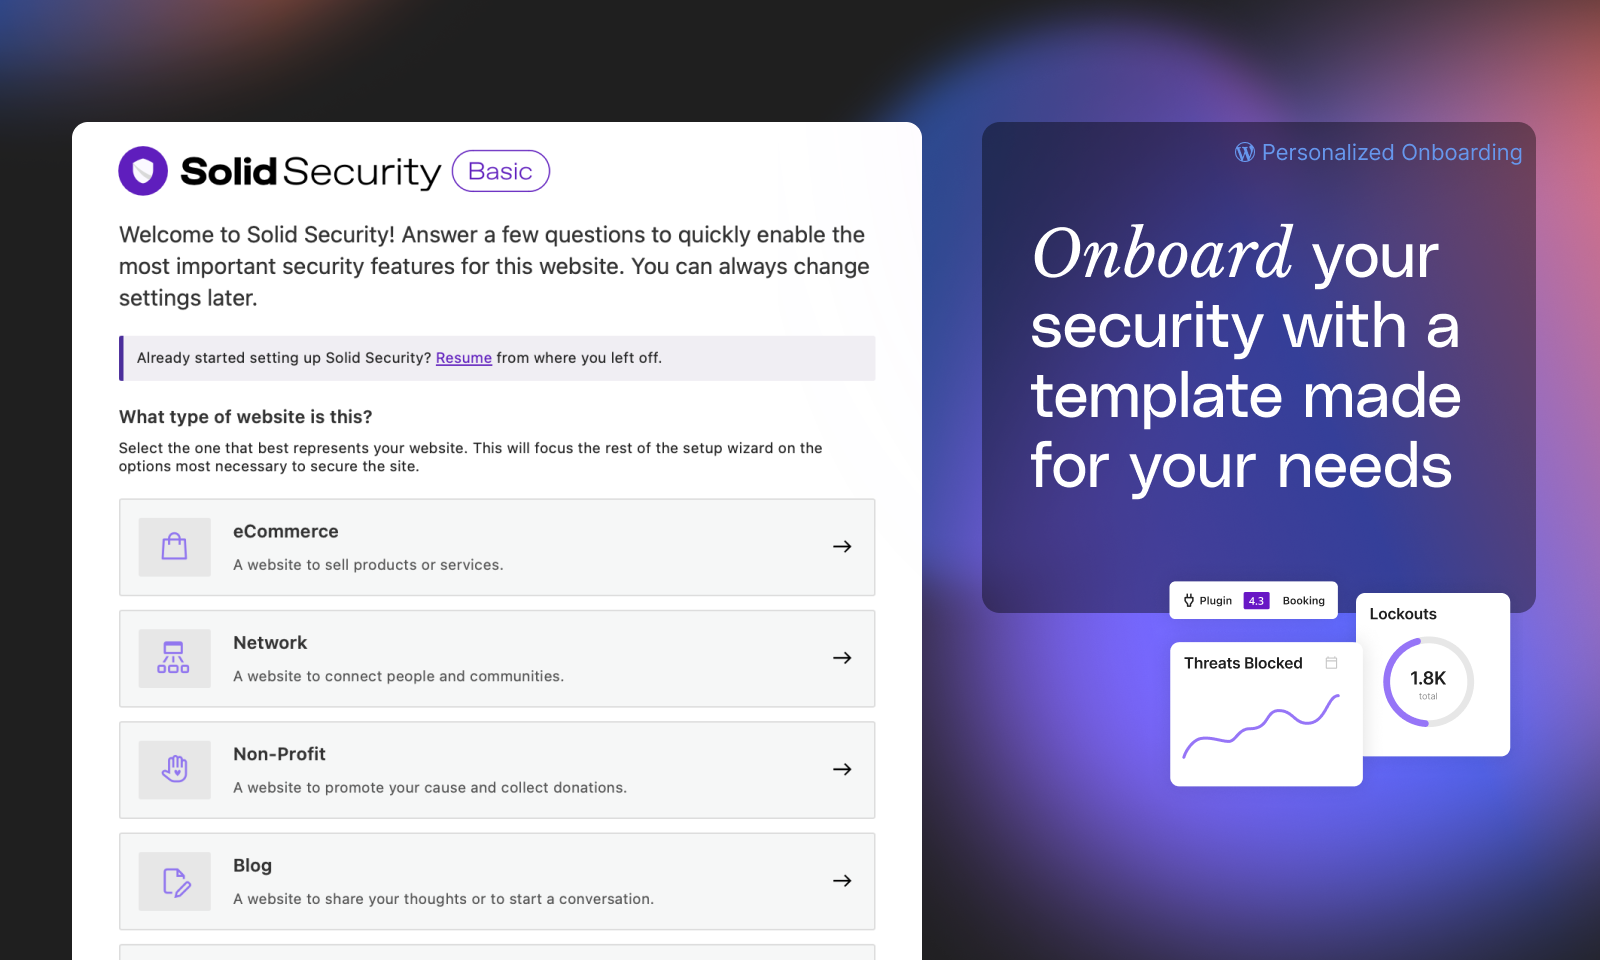 Customized onboarding configures your security settings to your needs